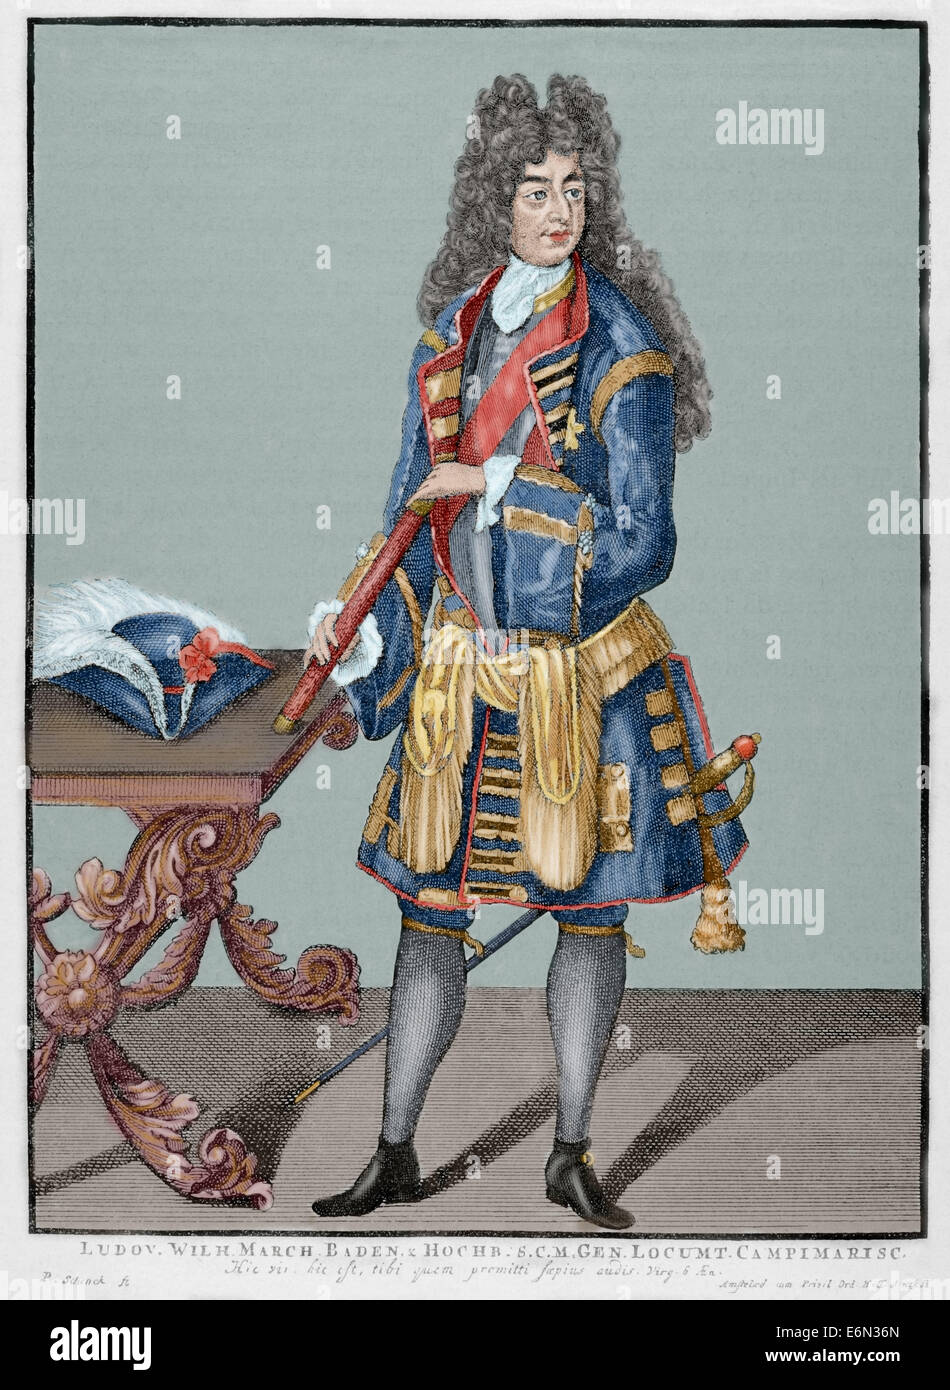 Louis William, Margrave of Baden-Baden (1655-1707). Reduced facsimile after the engraving of Peter Schenk (1645-1715). Colored. Stock Photo